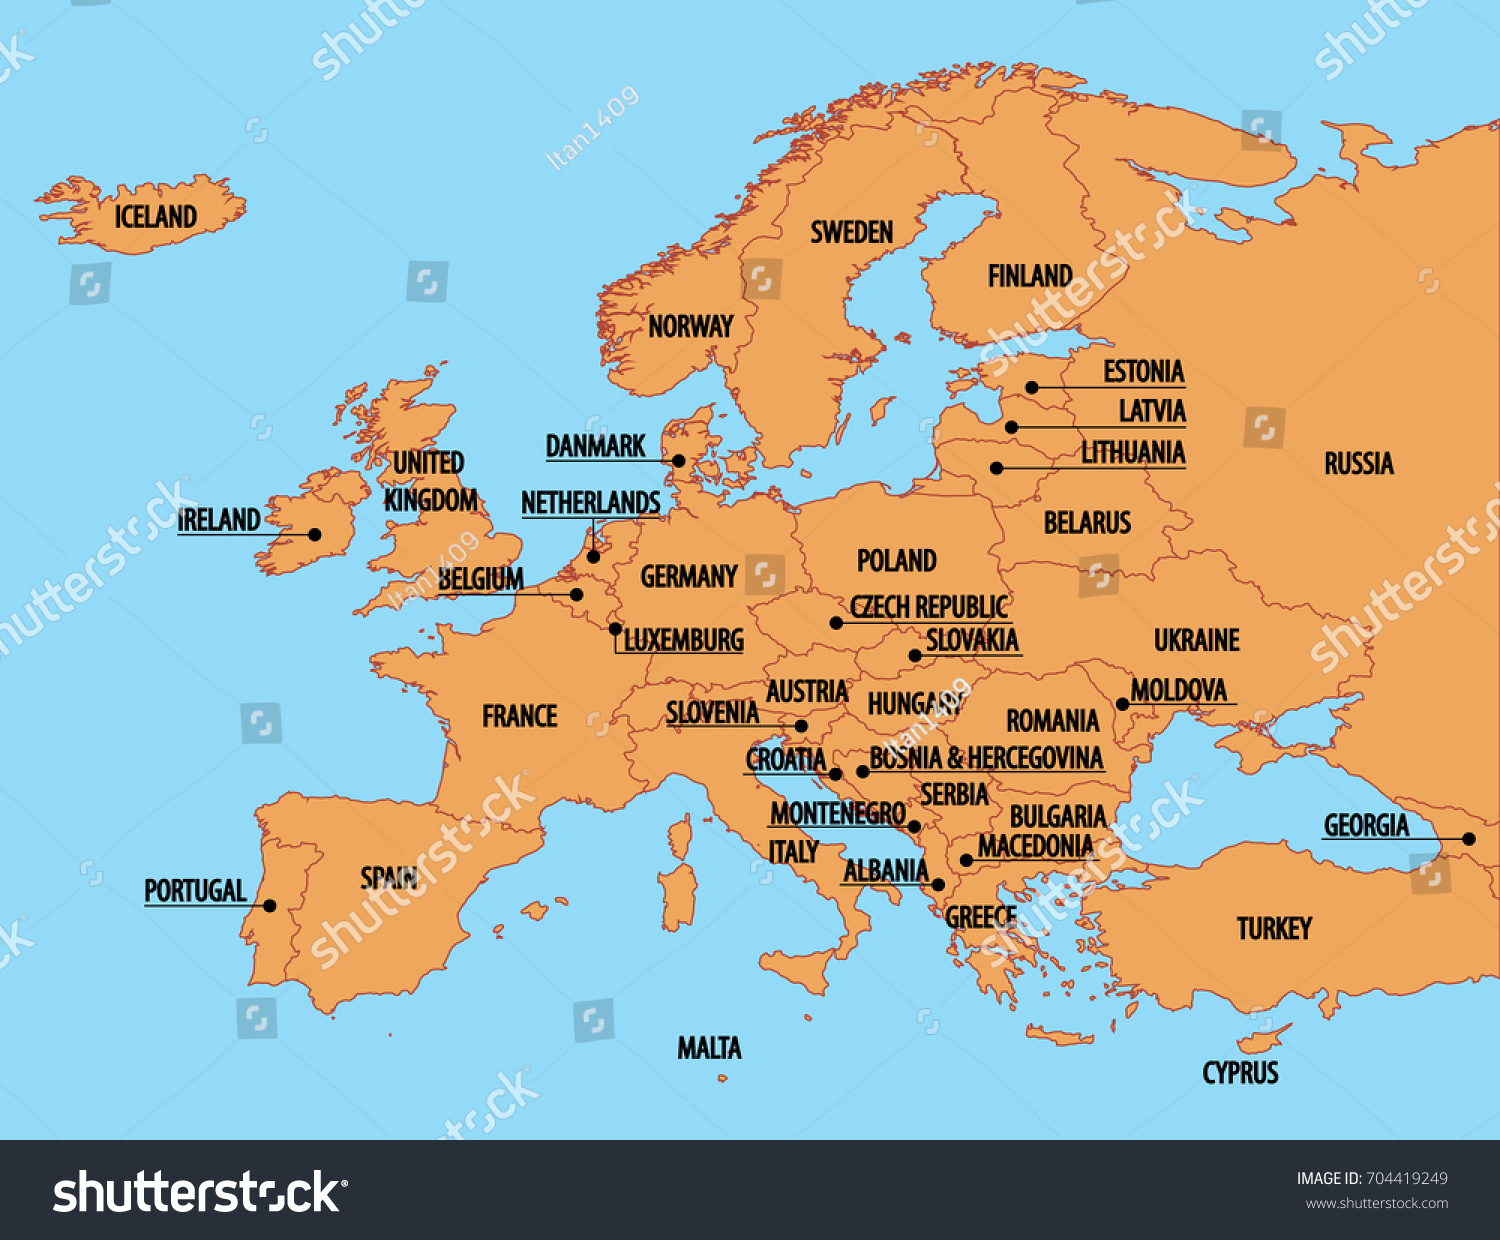 Europe Simple Map Country Names Stock Vector Royalty Free 704419249